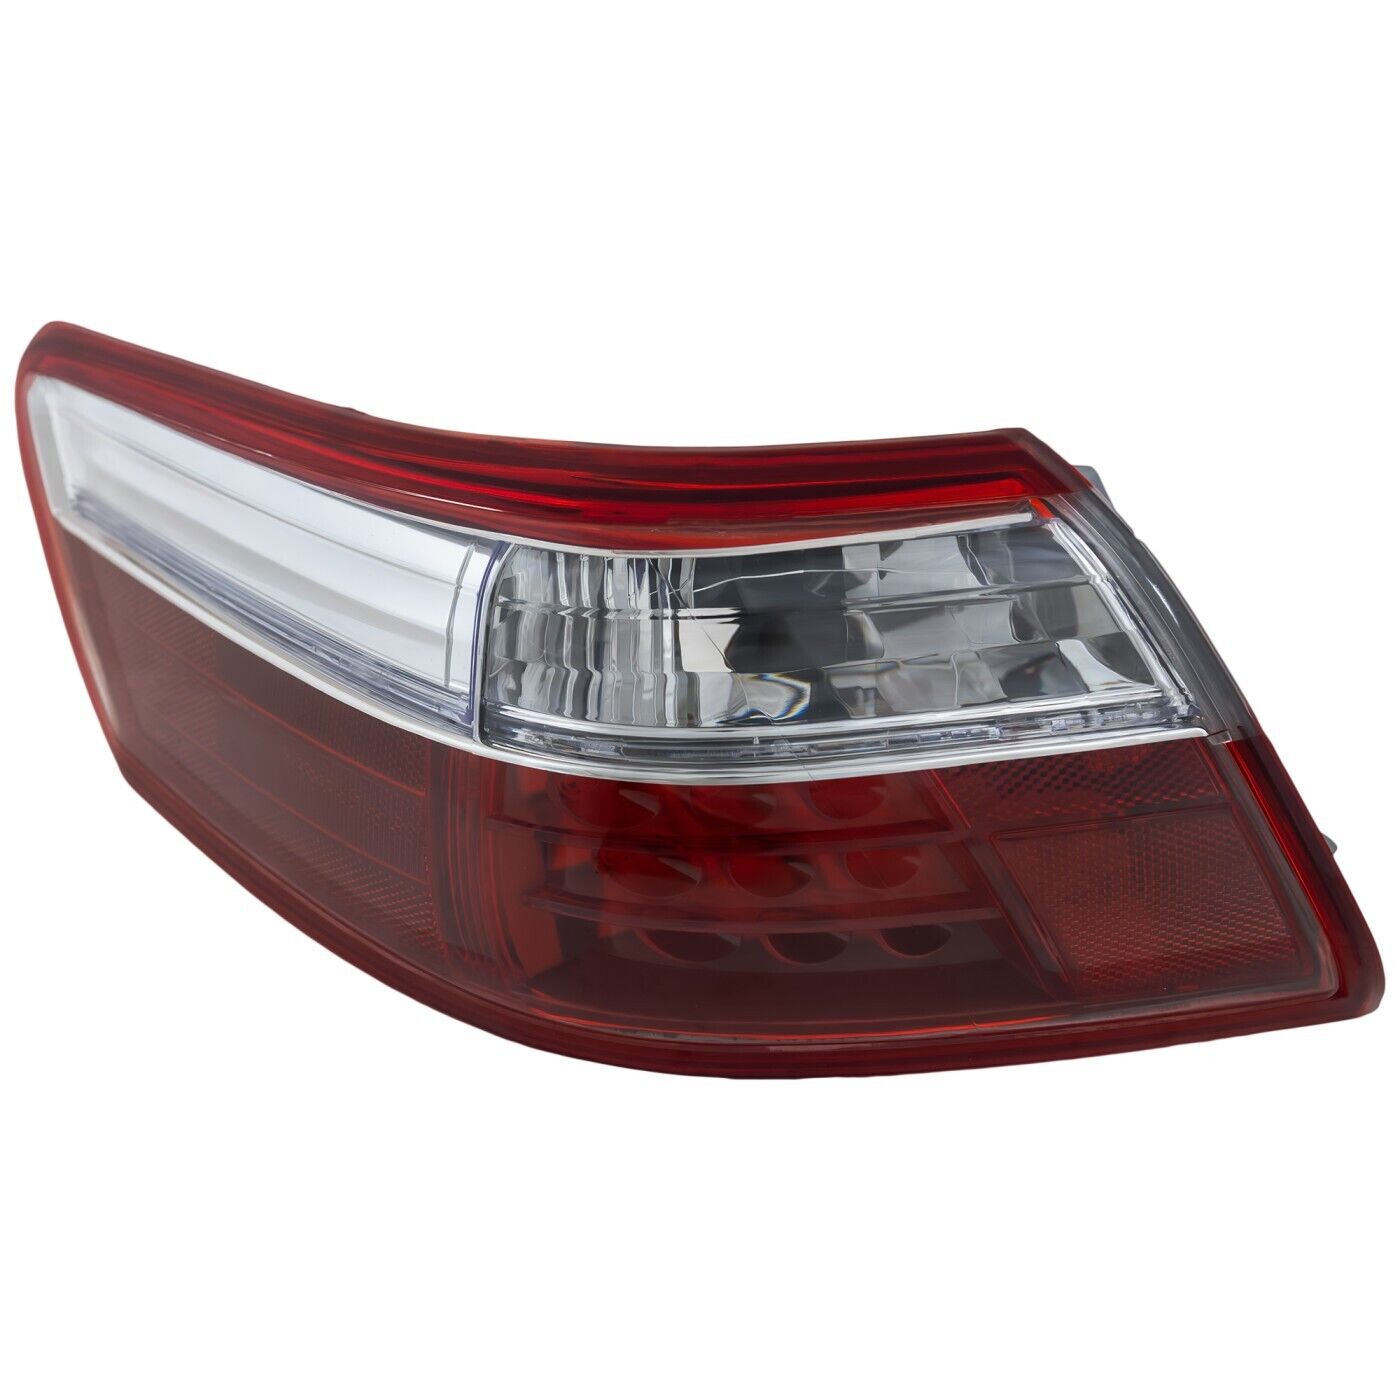 Tail Light For 2007-2009 Toyota Camry LH Outer LED Mounts On Body Japan/US Built